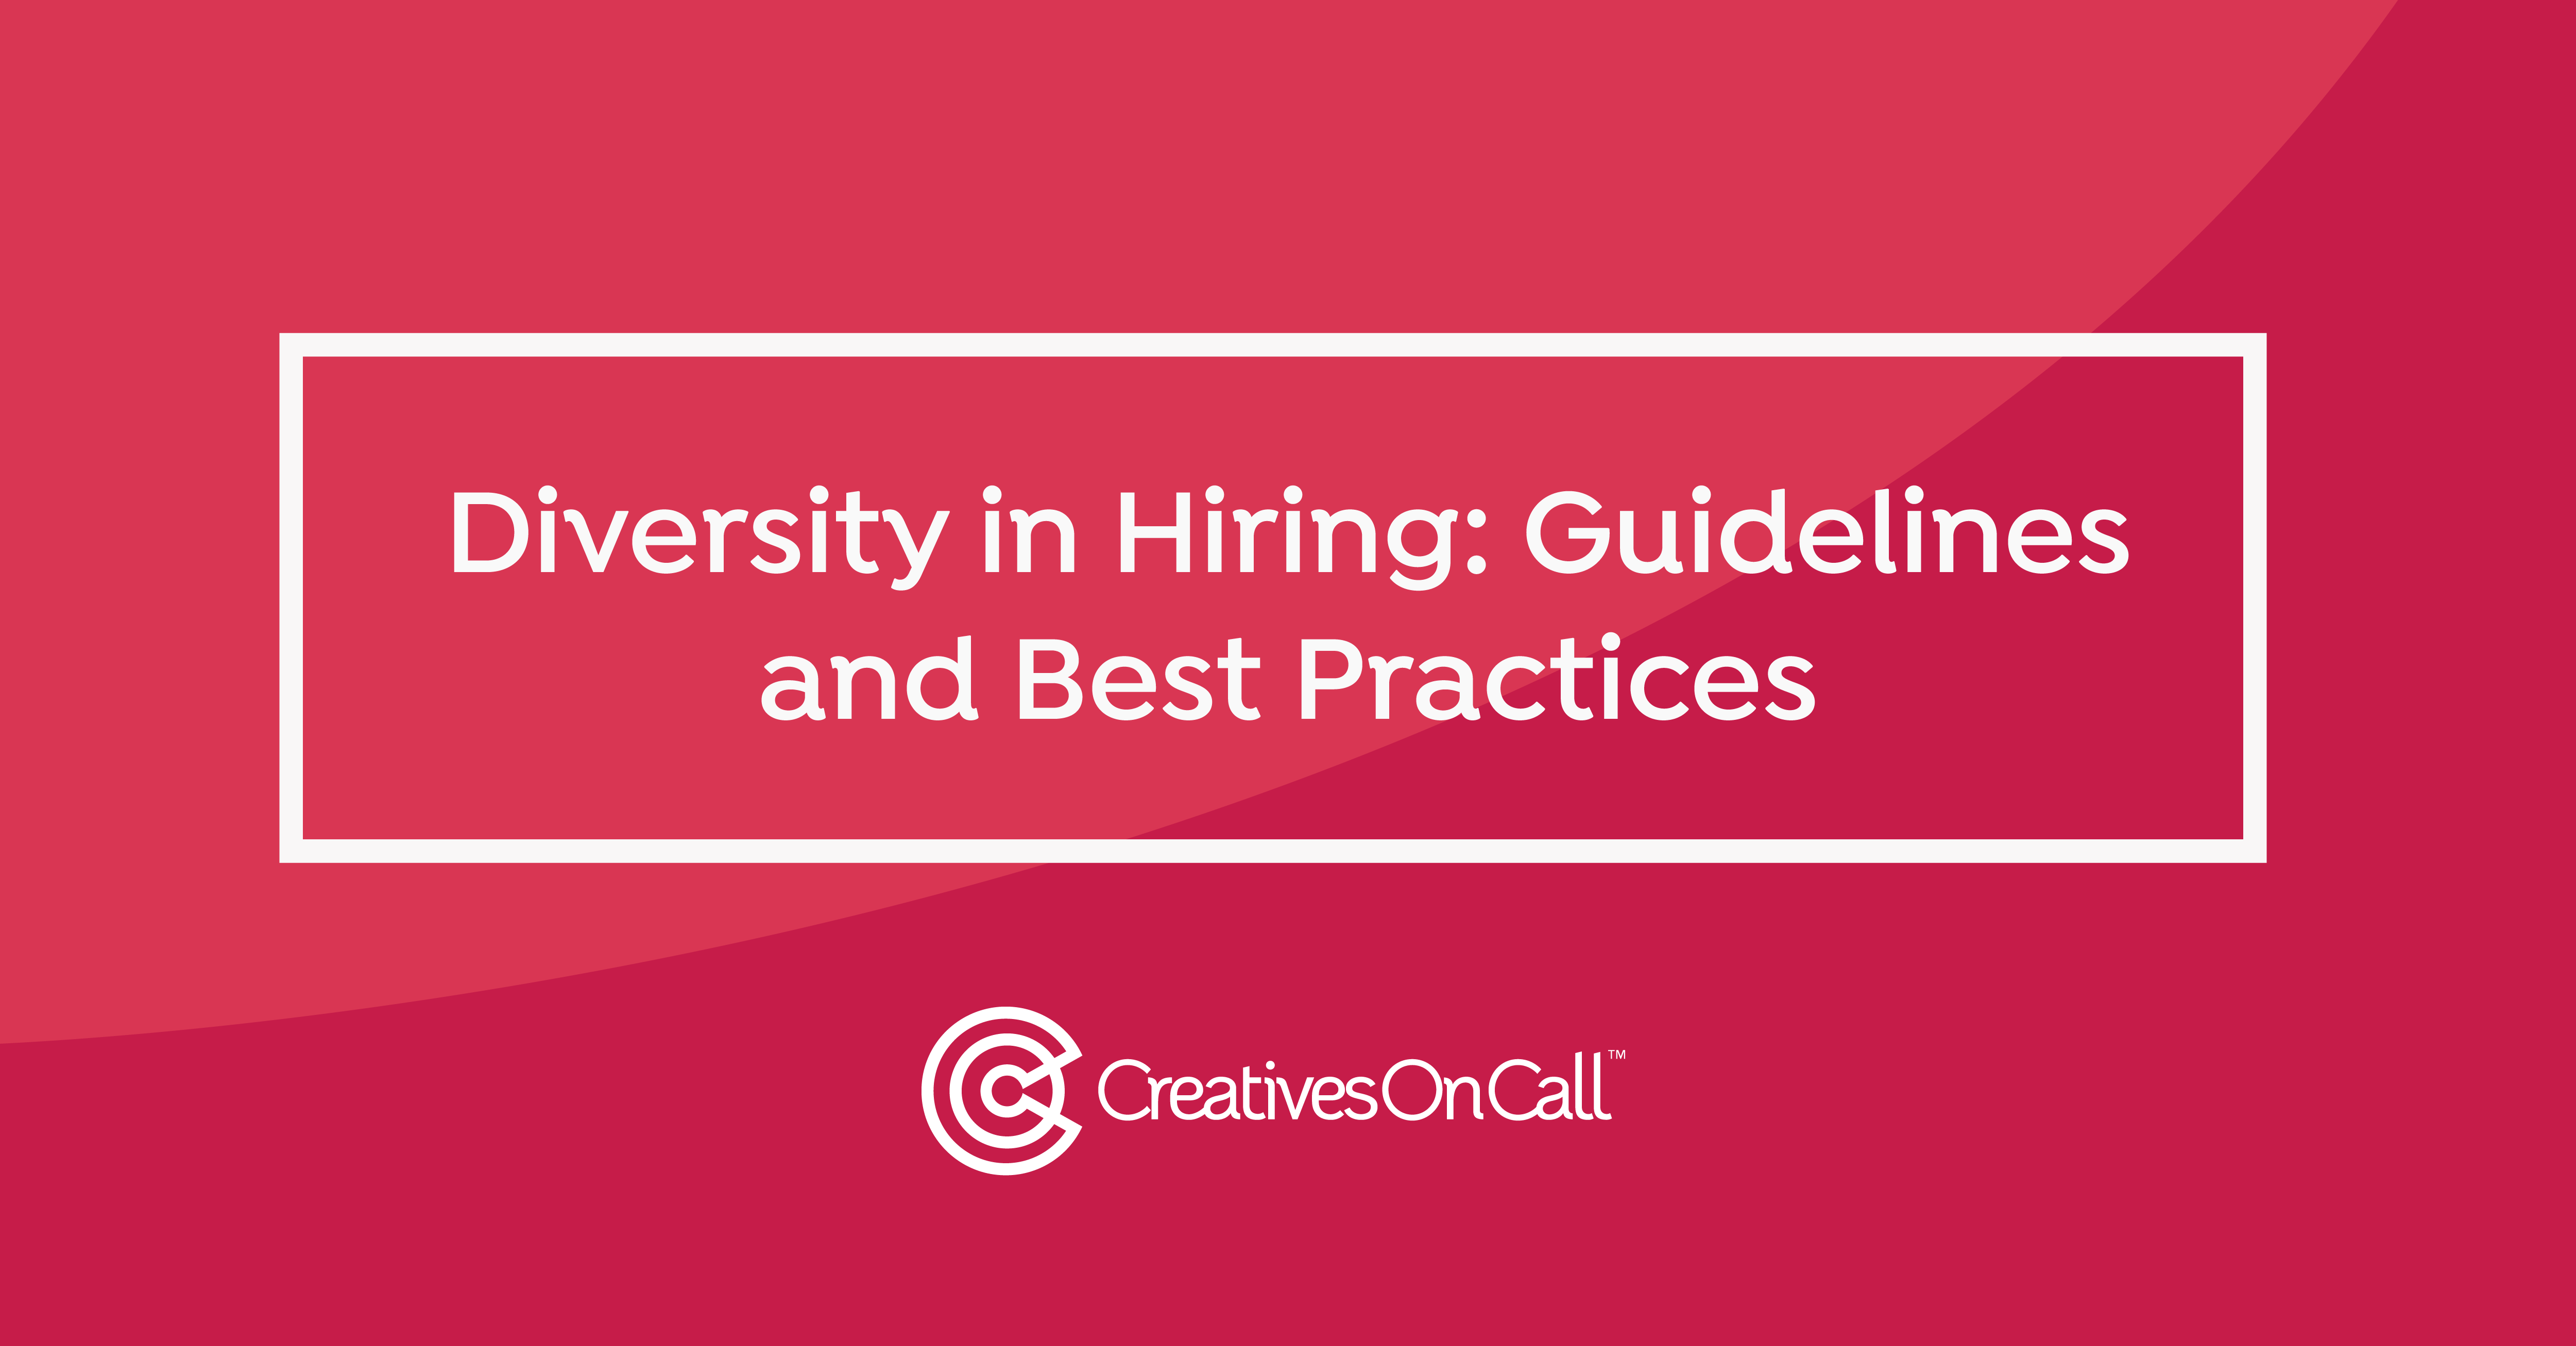 Diversity in Hiring: Guidelines and Best Practices